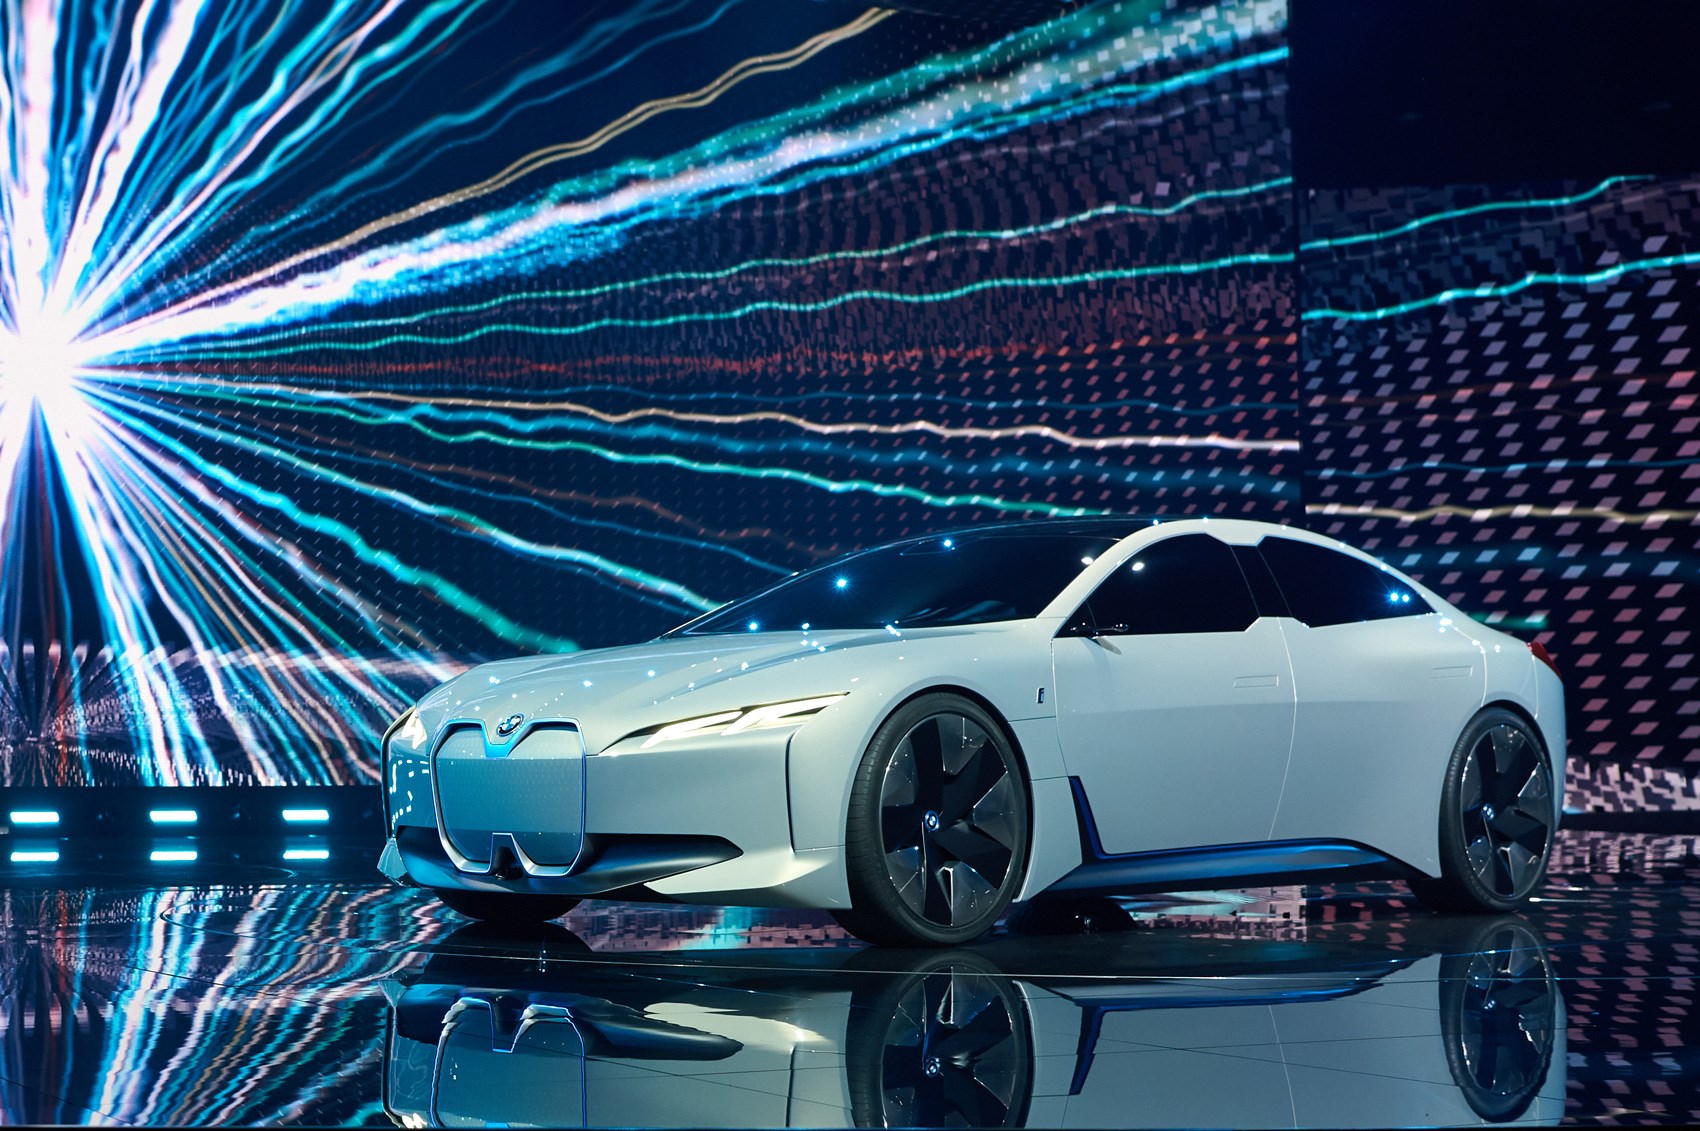 BMW i Vision Dynamics concept: is this the new BMW i5? | CAR Magazine